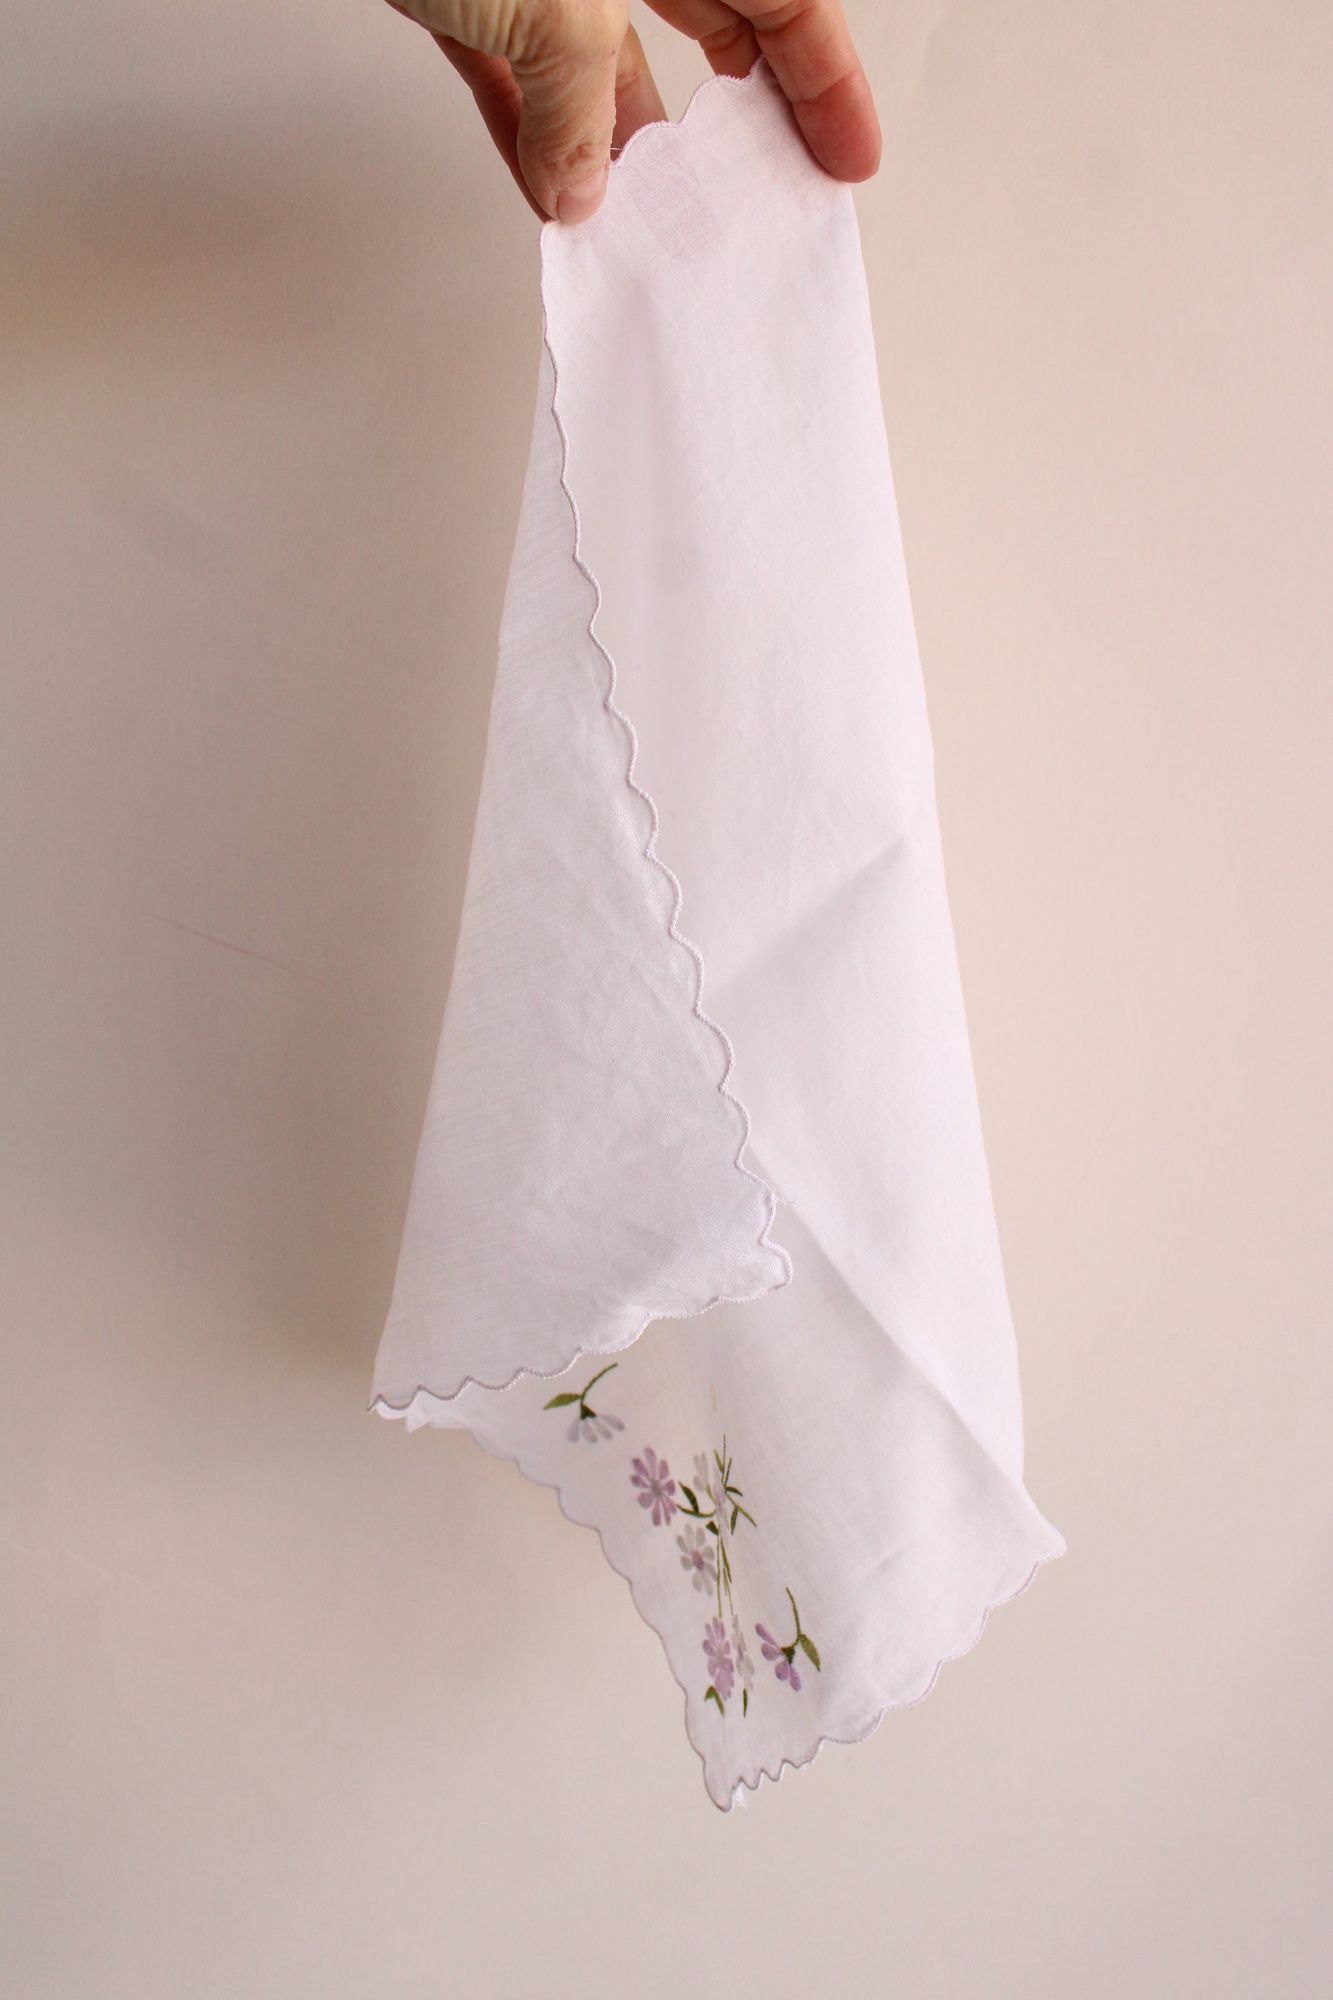 Vintage Handkerchief with Purple and White Daisy Flower Embroidery